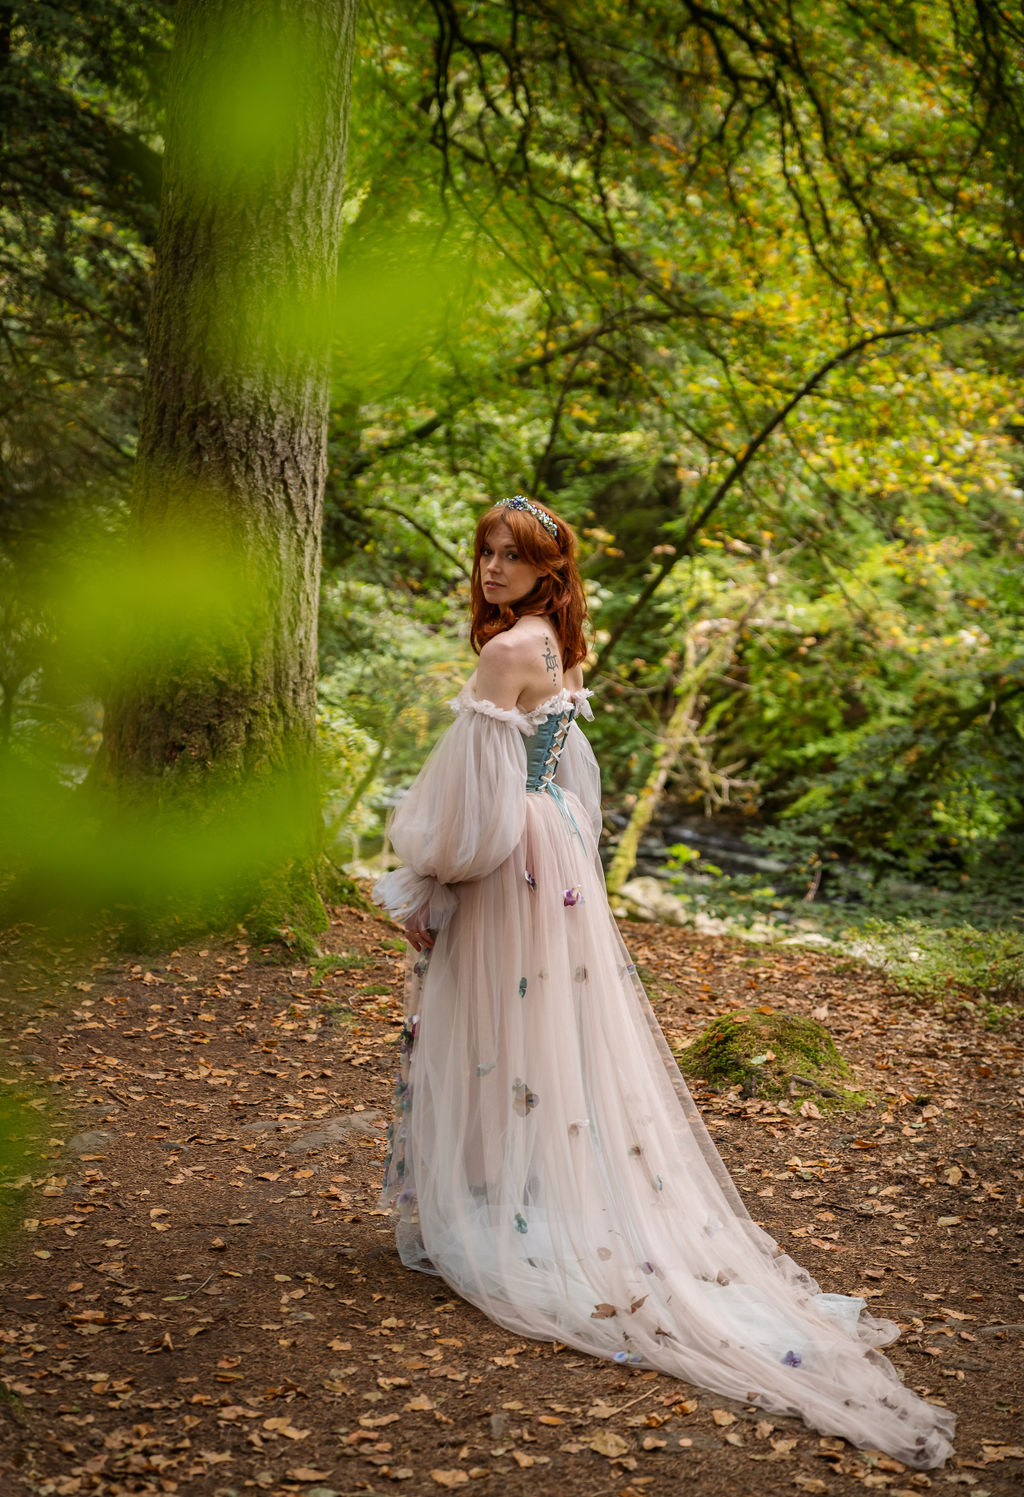 Bride stands in a forest wearing a off white whimsical wedding dress that has a blue corset style boddice. Bride has beautiful long auburn hair.